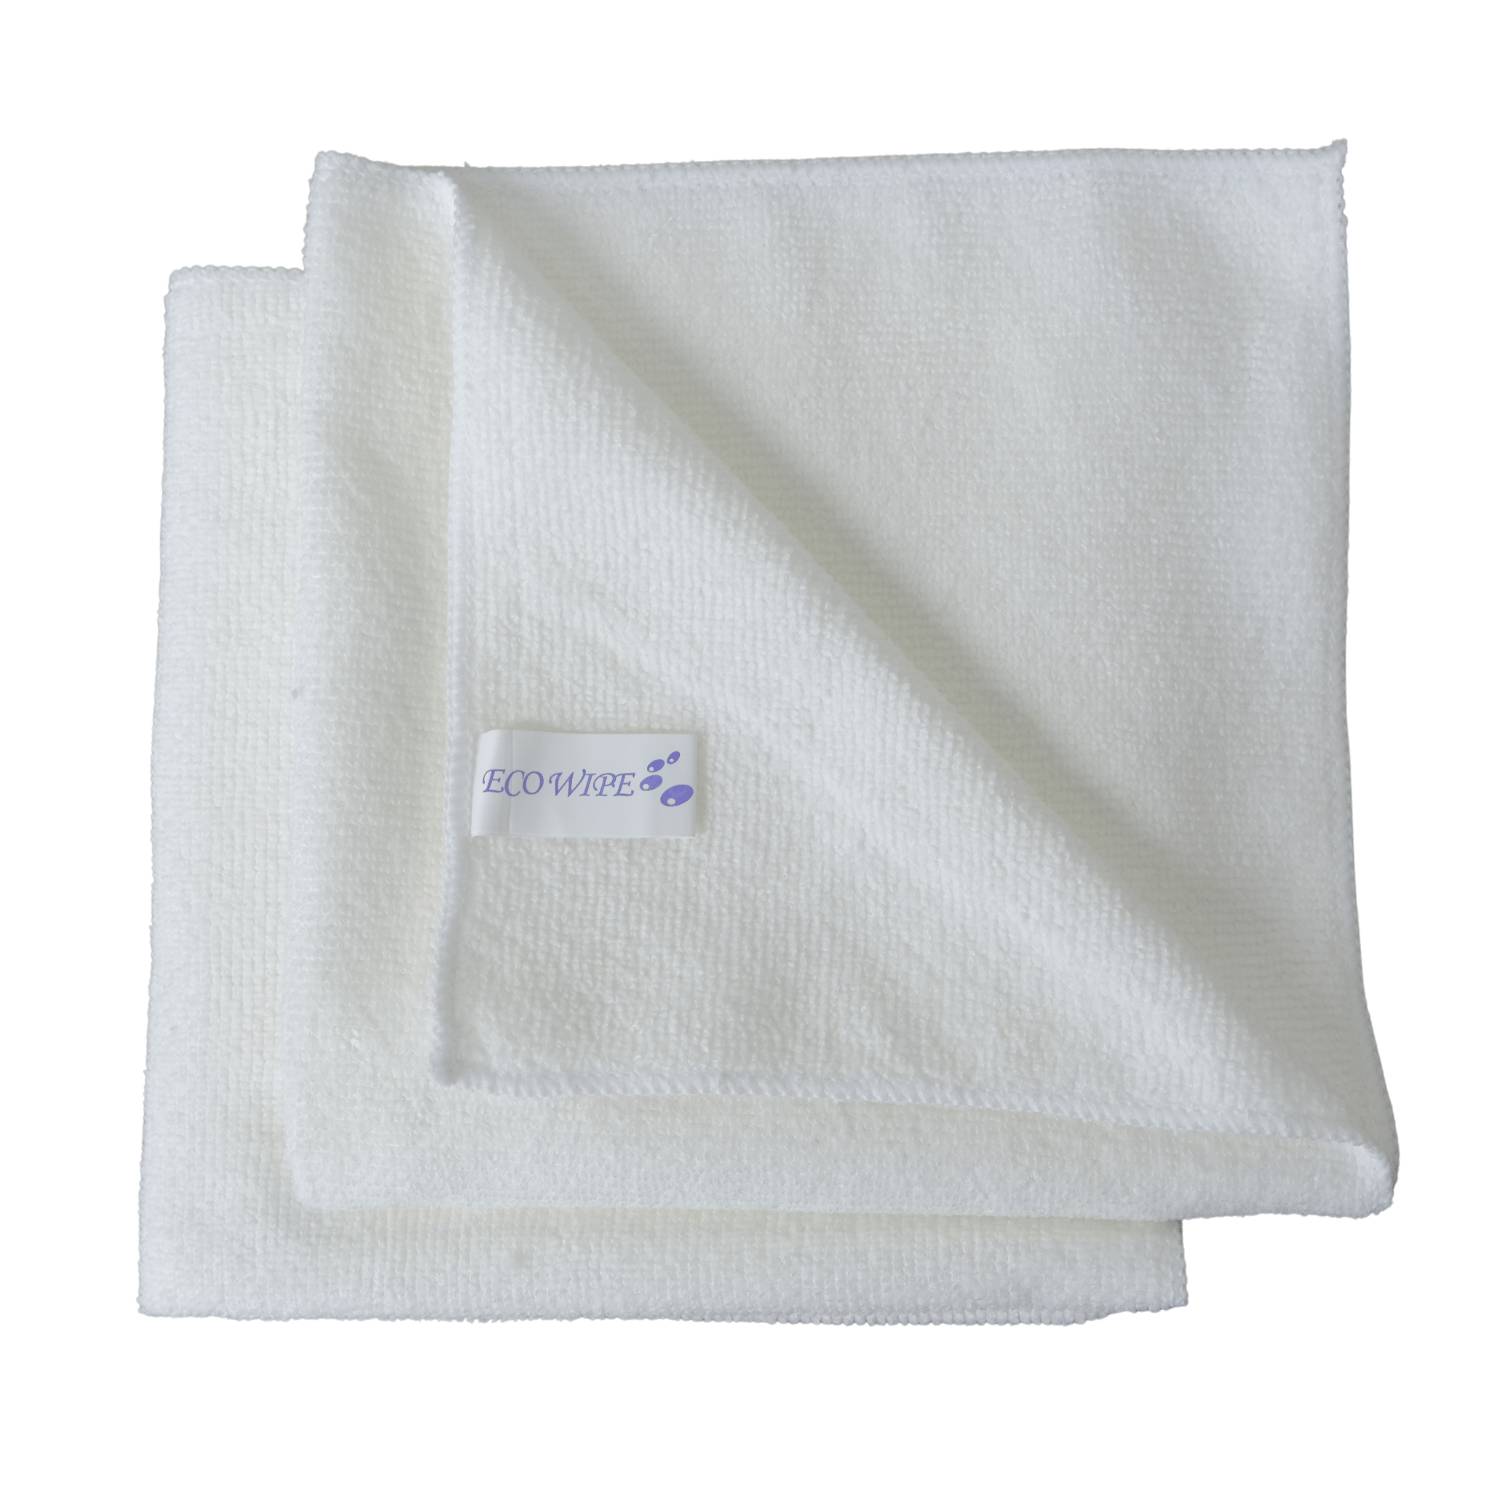 EcoWipes - General Purpose Microfibre Cloths - Pack of 10